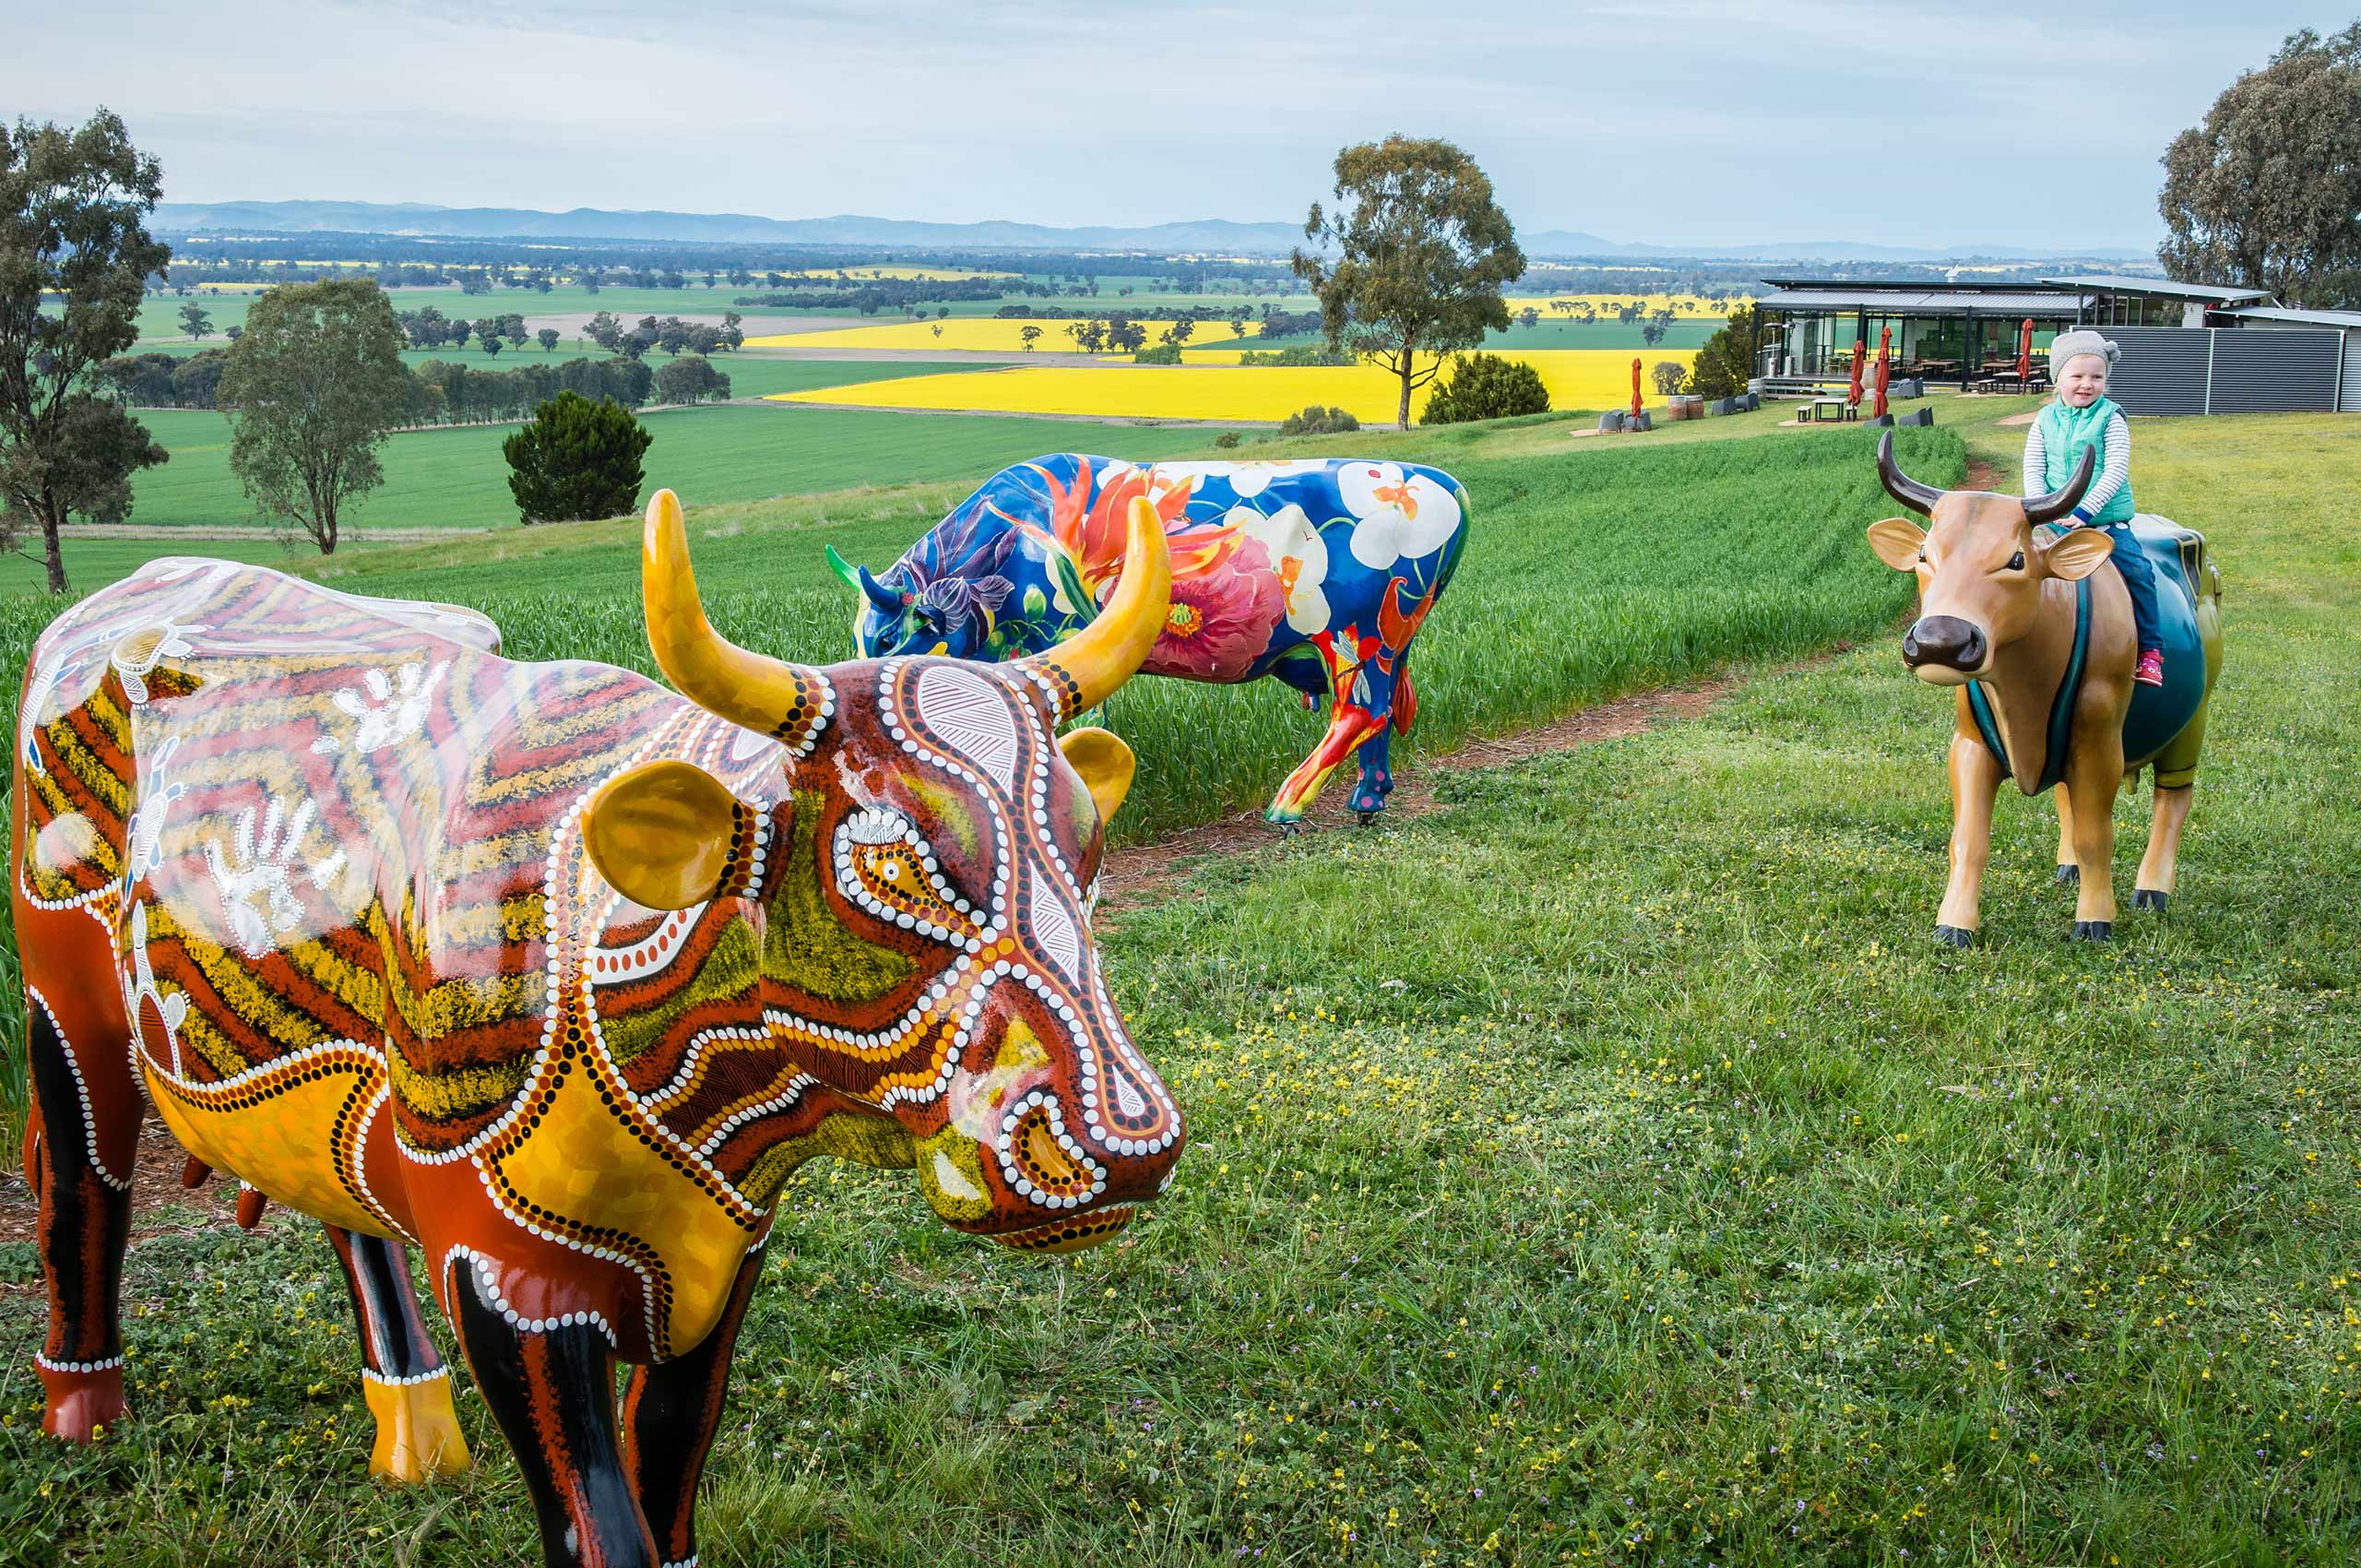 A group of cow shaped sculptures in a canola field.